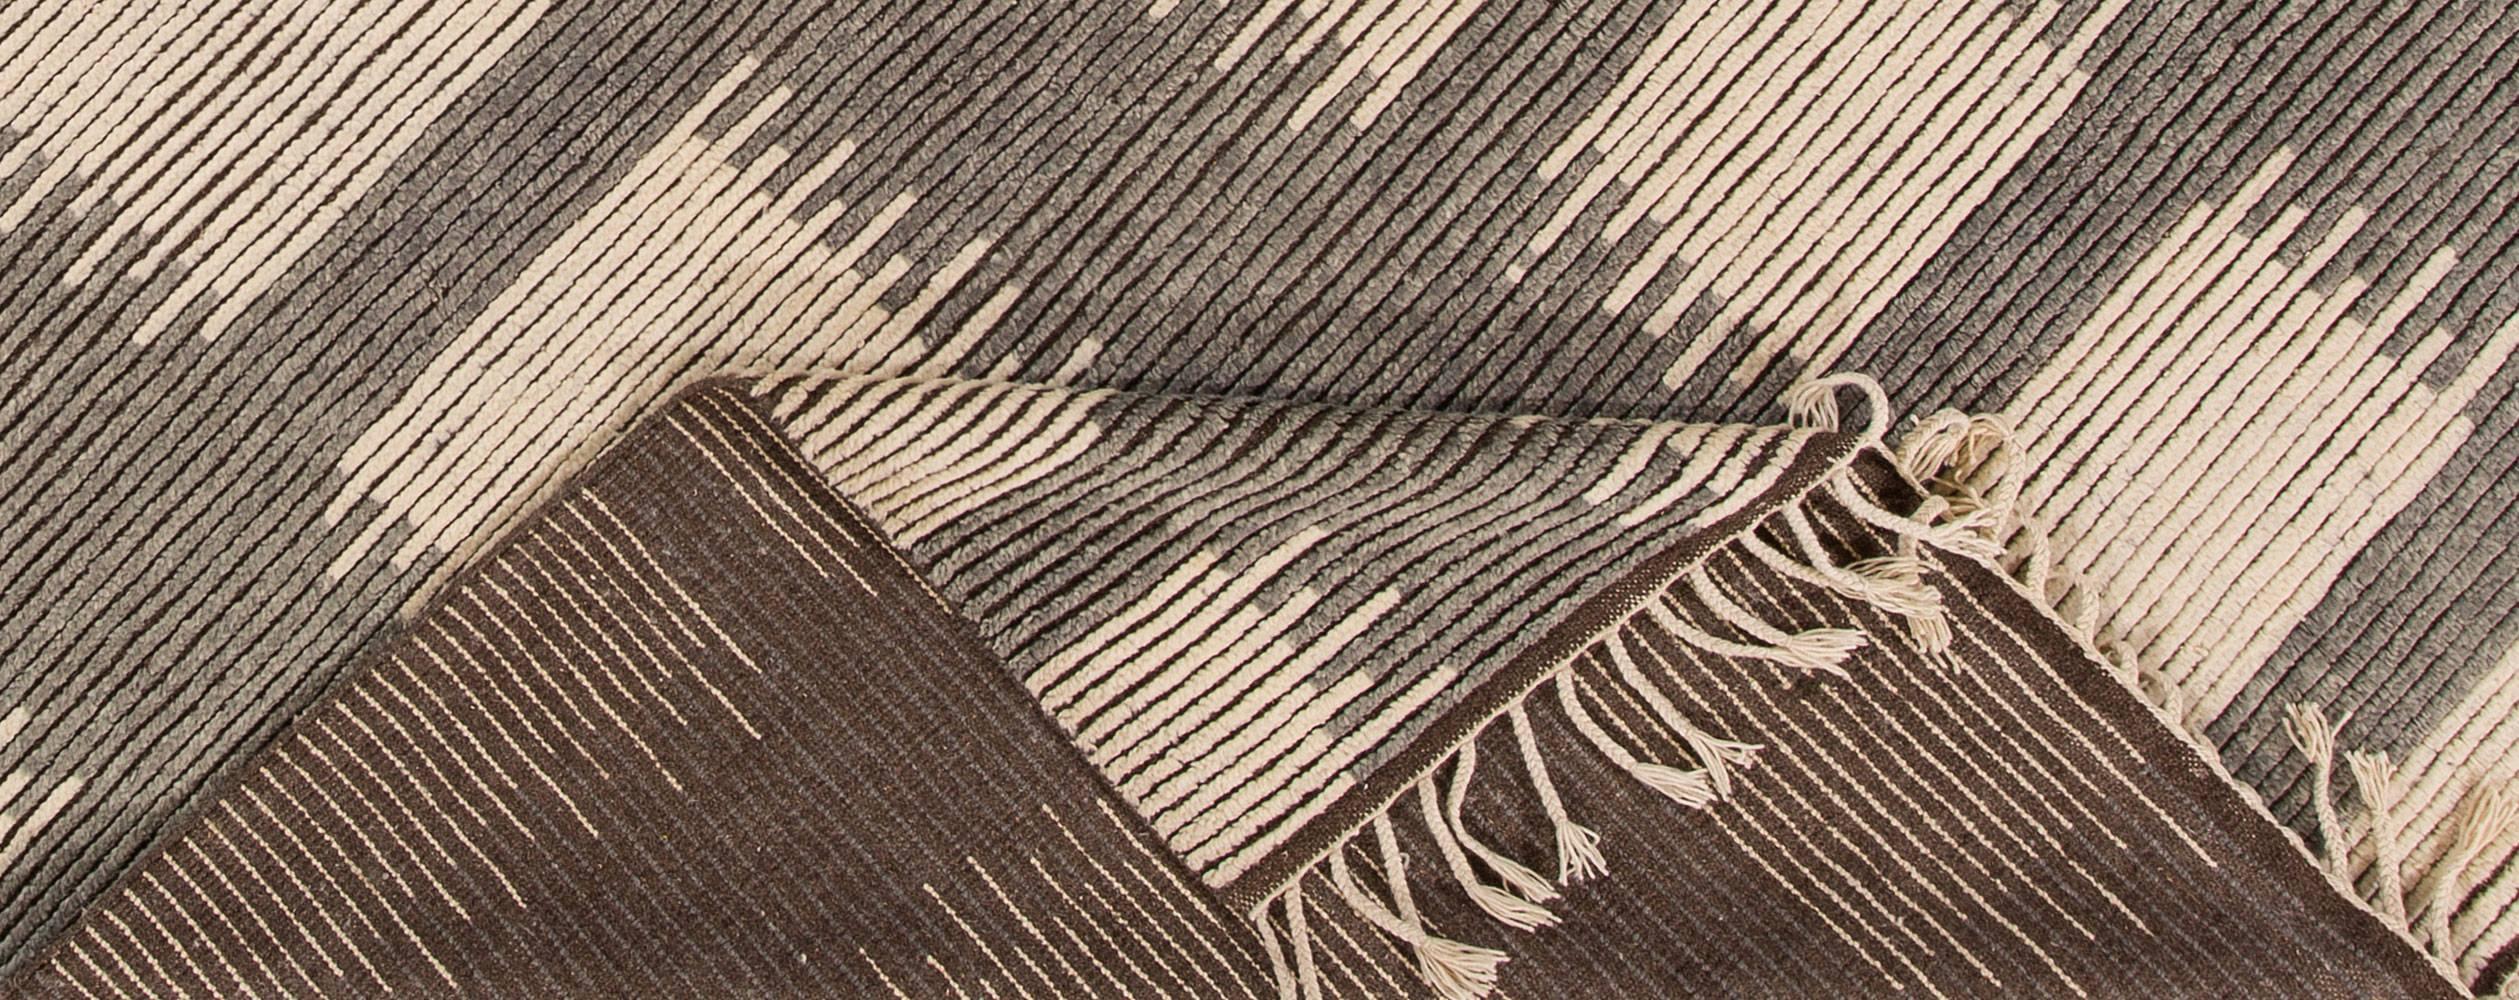 21st century contemporary Moroccan-style carpet, handwoven in India. This piece features a geometric pattern in cream on a dark brown background. This color palette creates some interesting contrast. Measures 10.05 x 14.